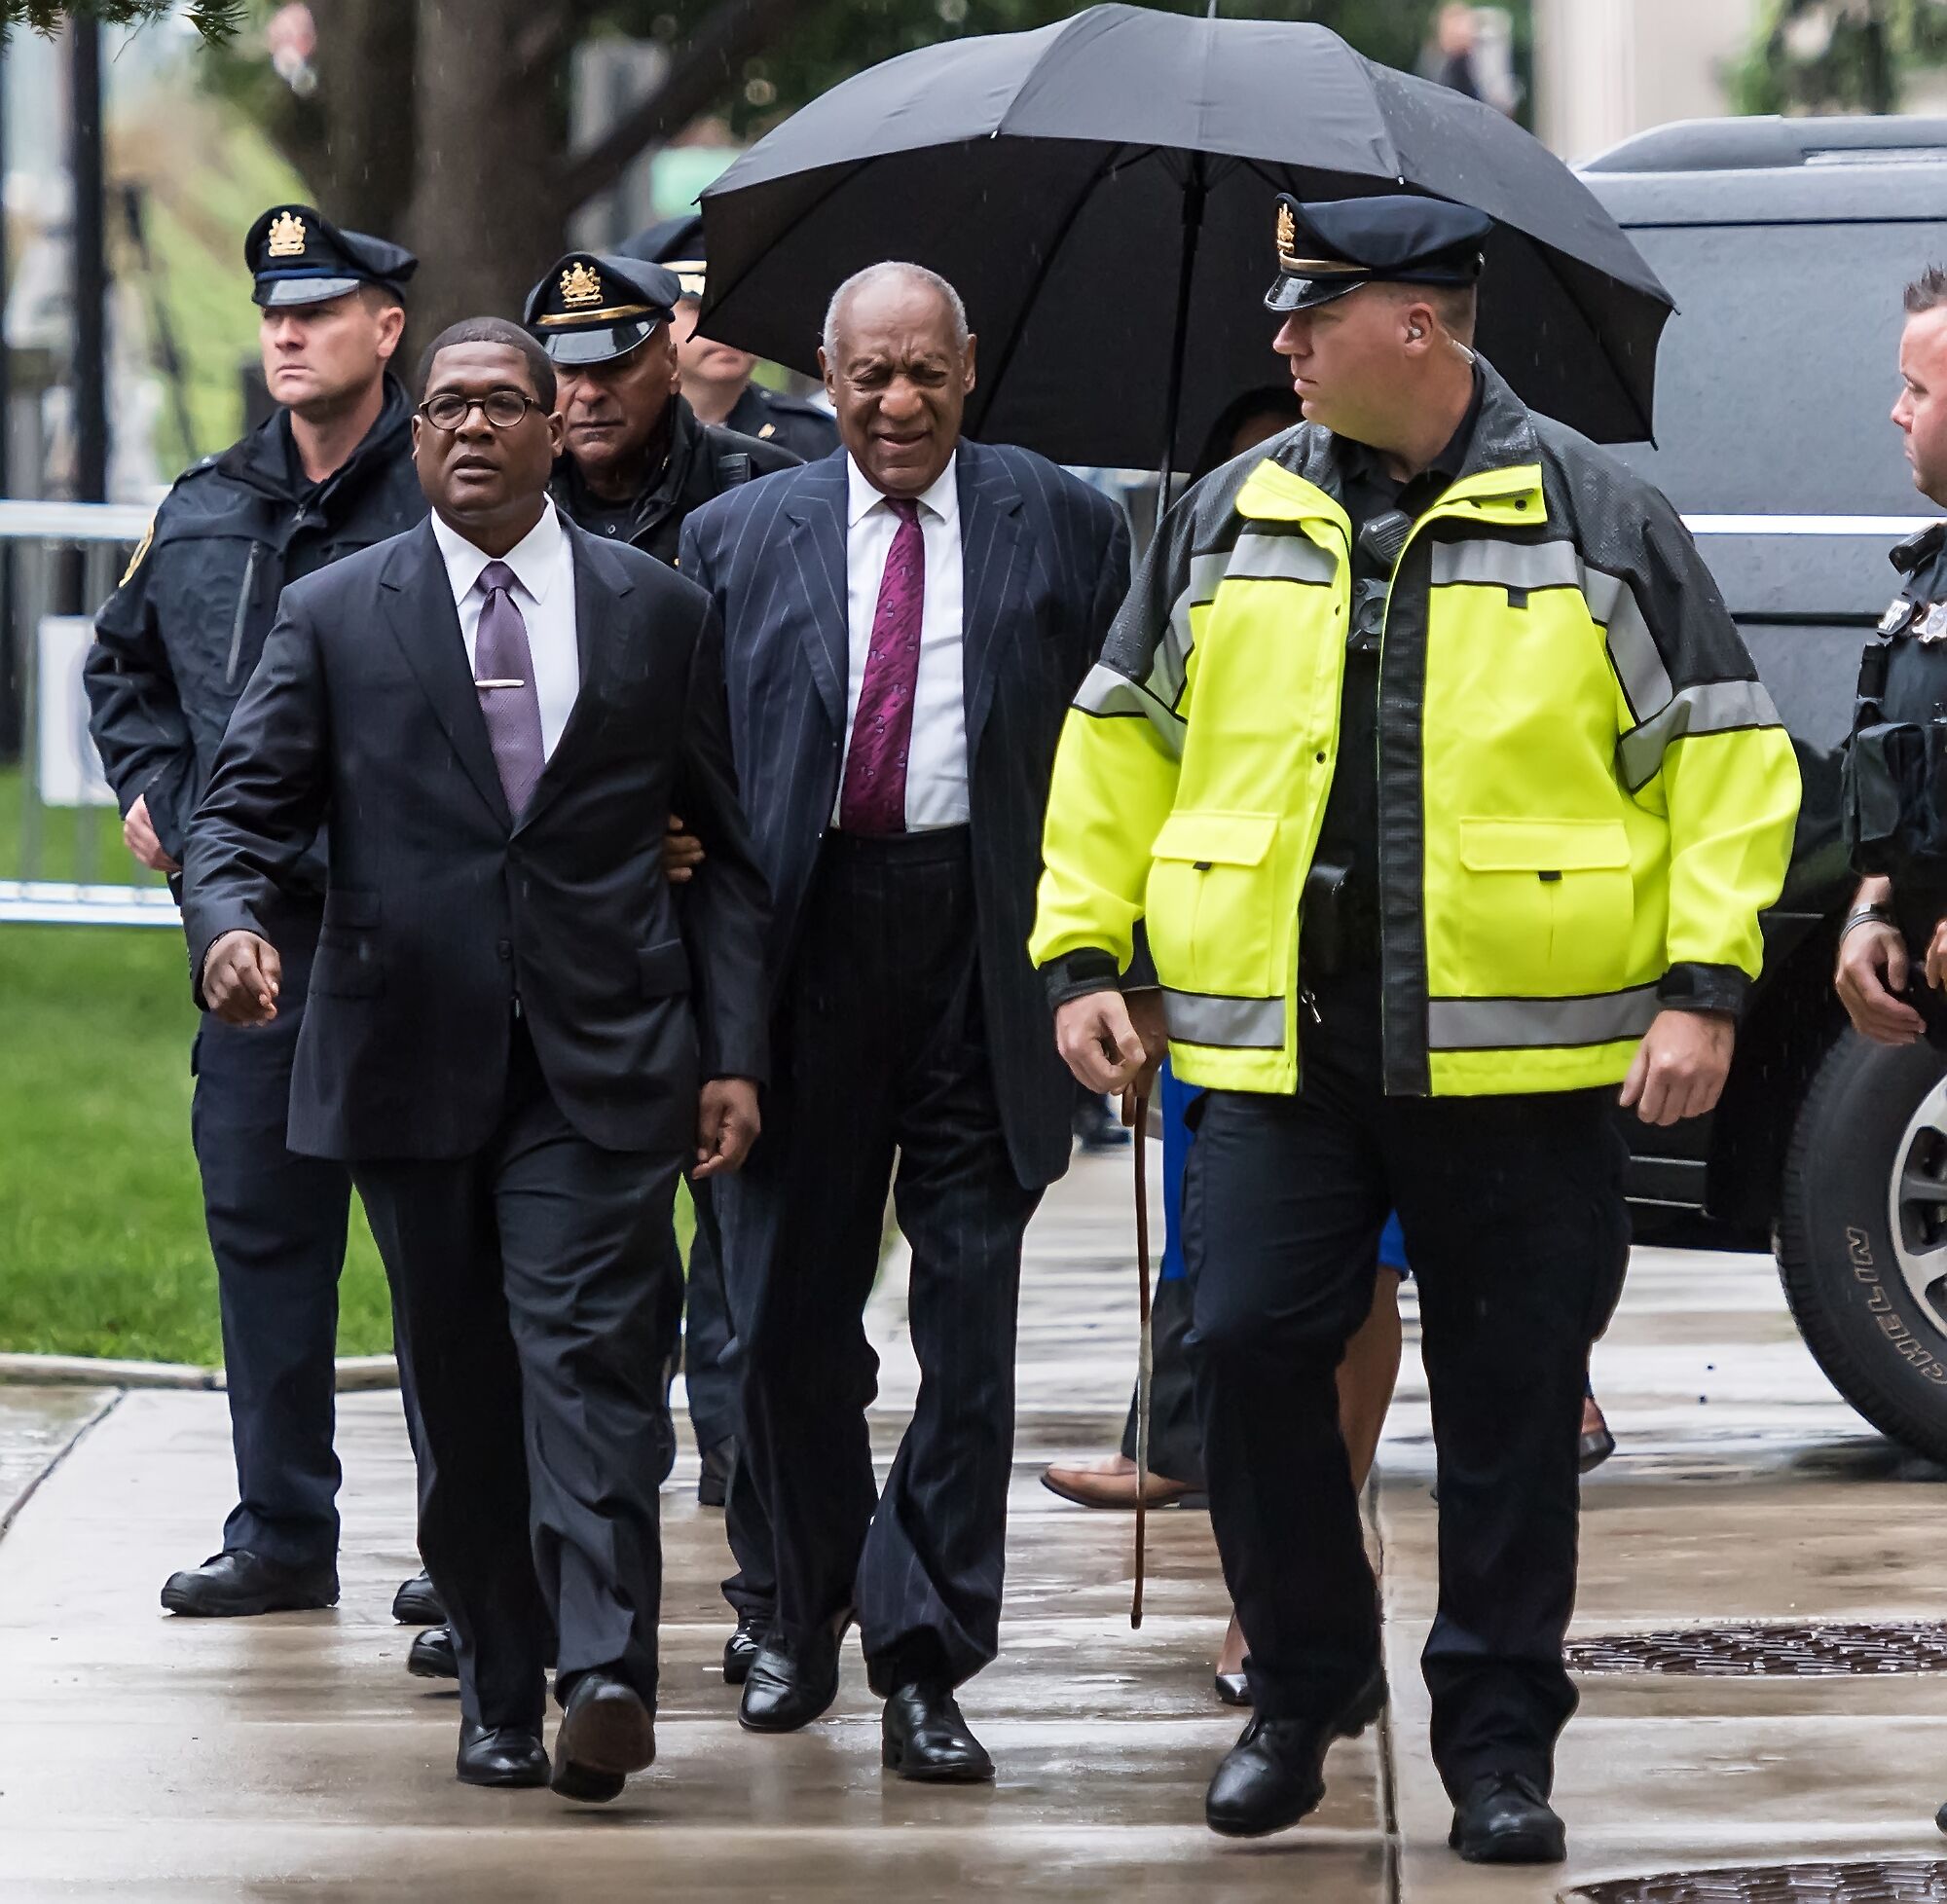 Bill Cosby arrives for sentencing for his sexual assault trial at the Montgomery Courthouse. | Source: Getty Images